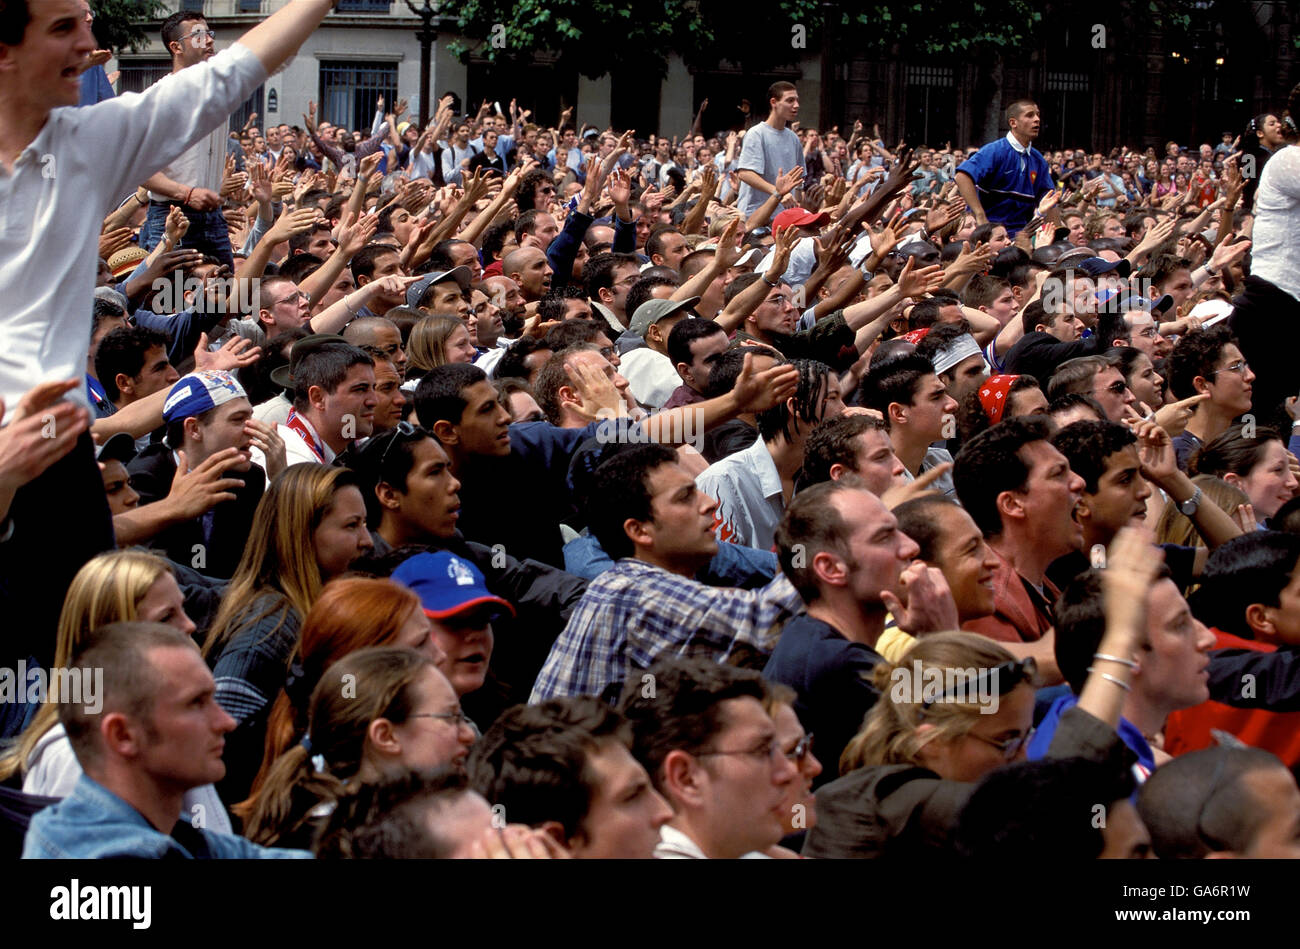 Crowd of fans gesture as they watch French national soccer team game on giant screen, Place de l'Hotel de Ville, Paris, France, June 2002. Stock Photo